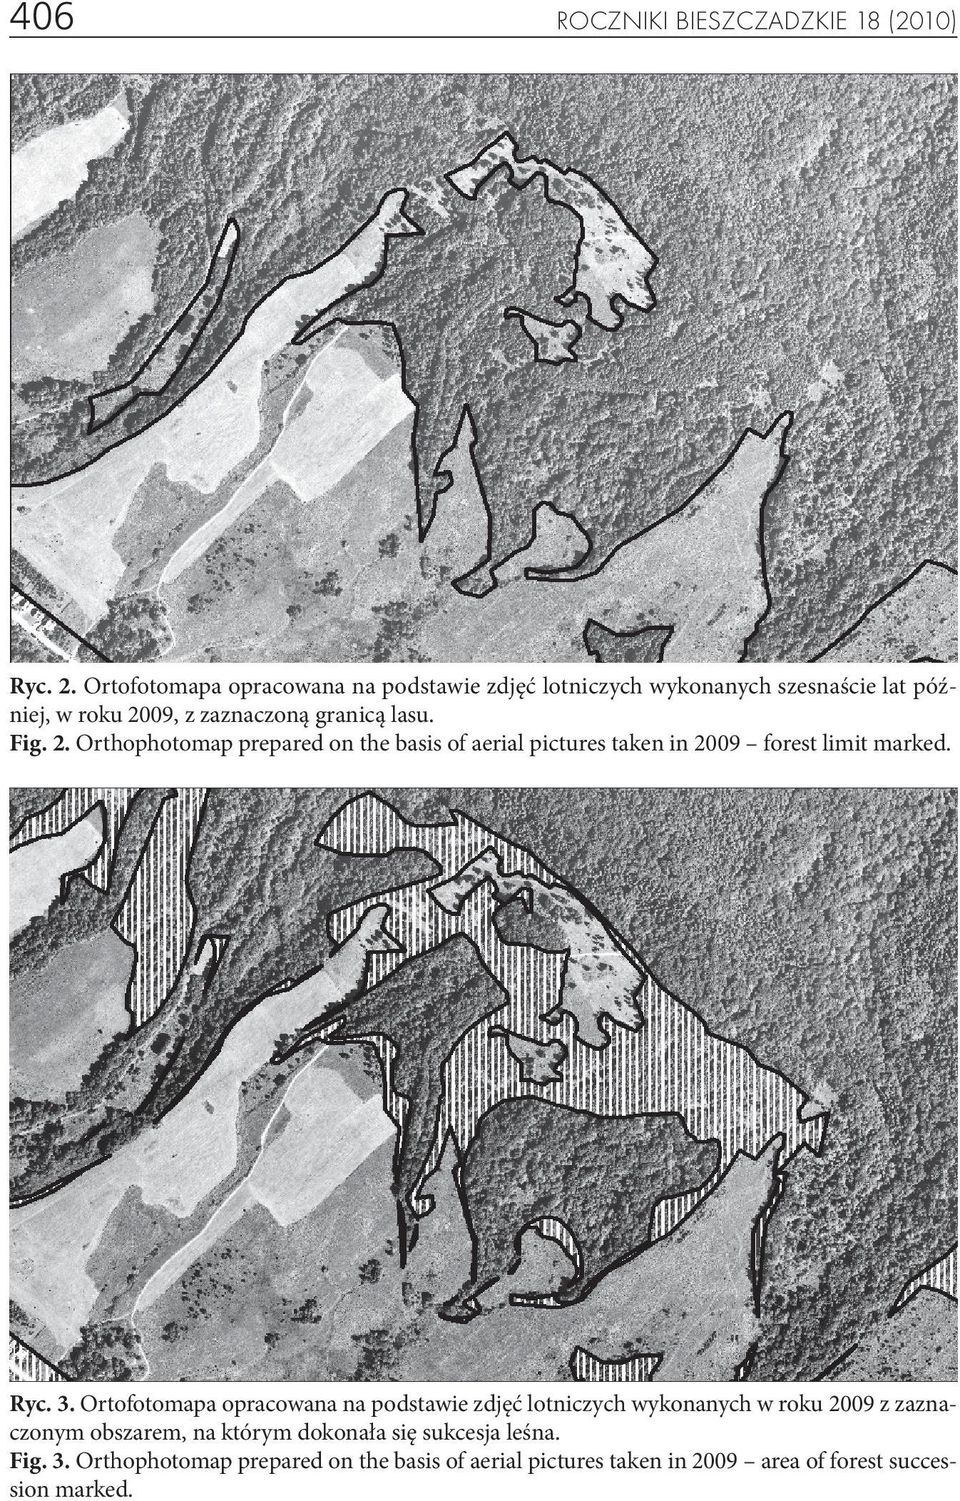 2. Orthophotomap prepared on the basis of aerial pictures taken in 2009 forest limit marked. Ryc. 3.